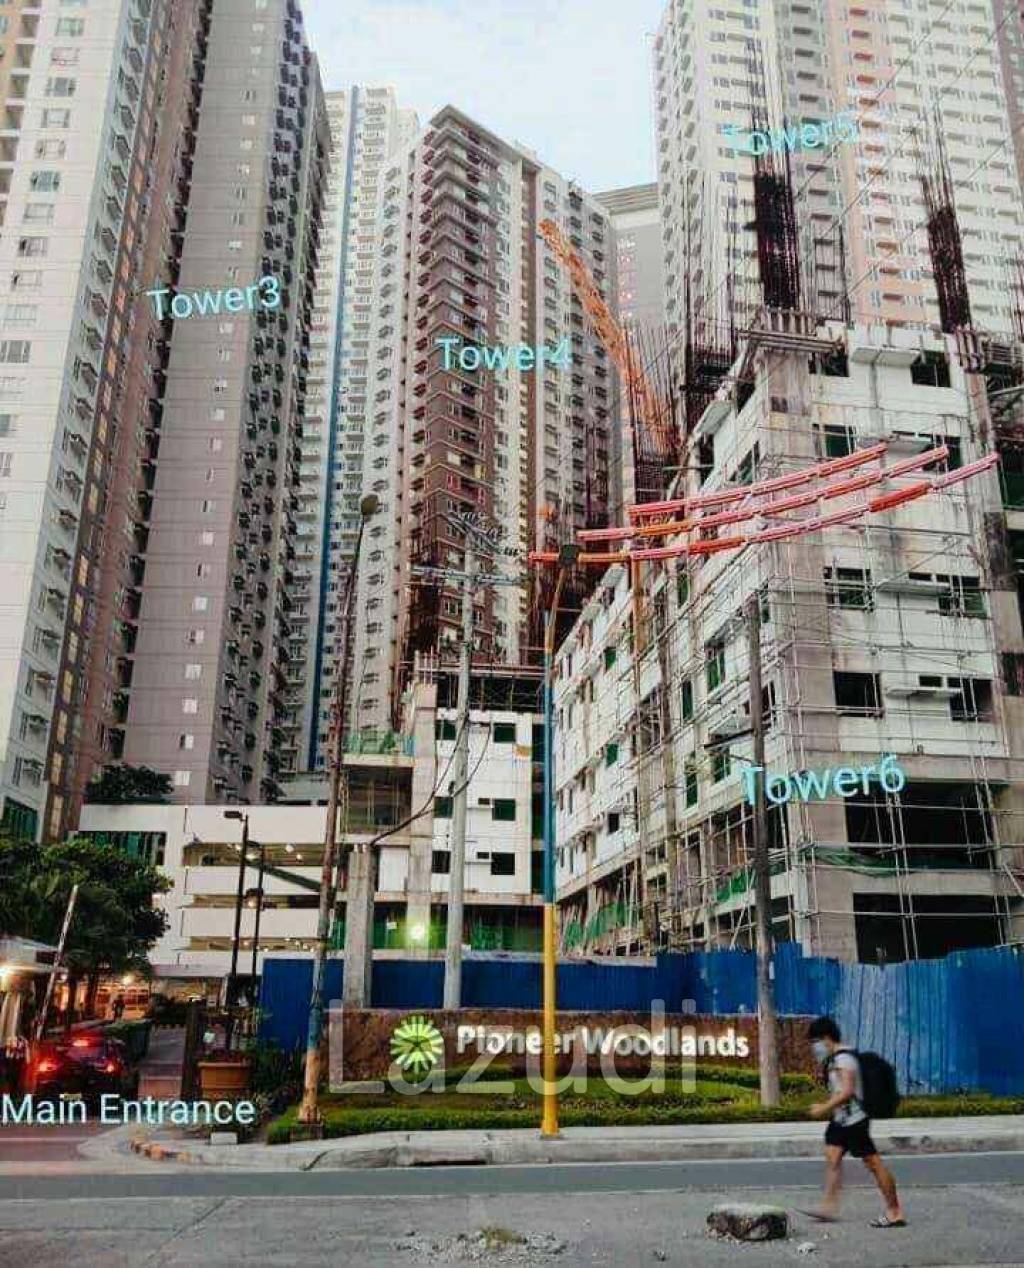 FOR SALE: 1BR in Pioneer Woodlands Tower 6 (Assume Balance).